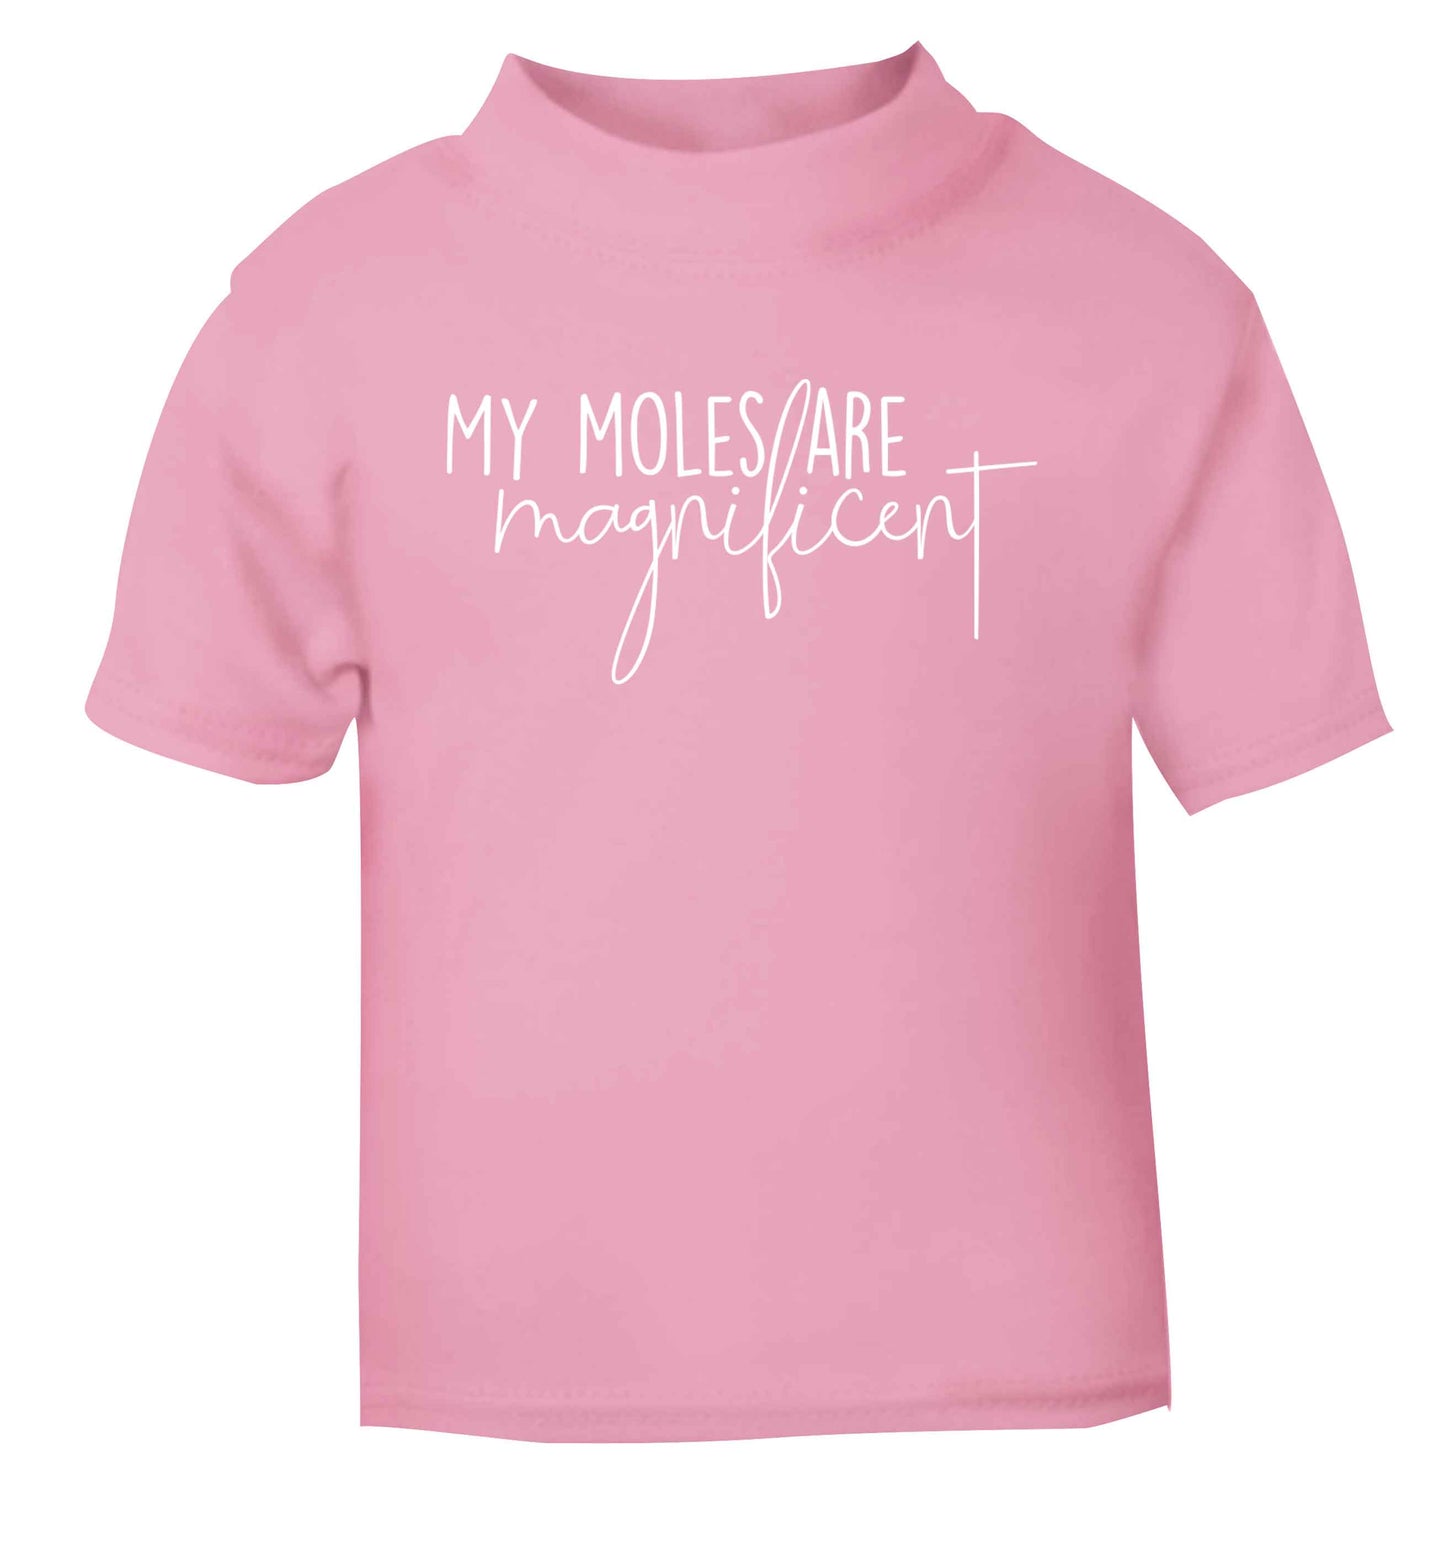 My moles are magnificent light pink baby toddler Tshirt 2 Years